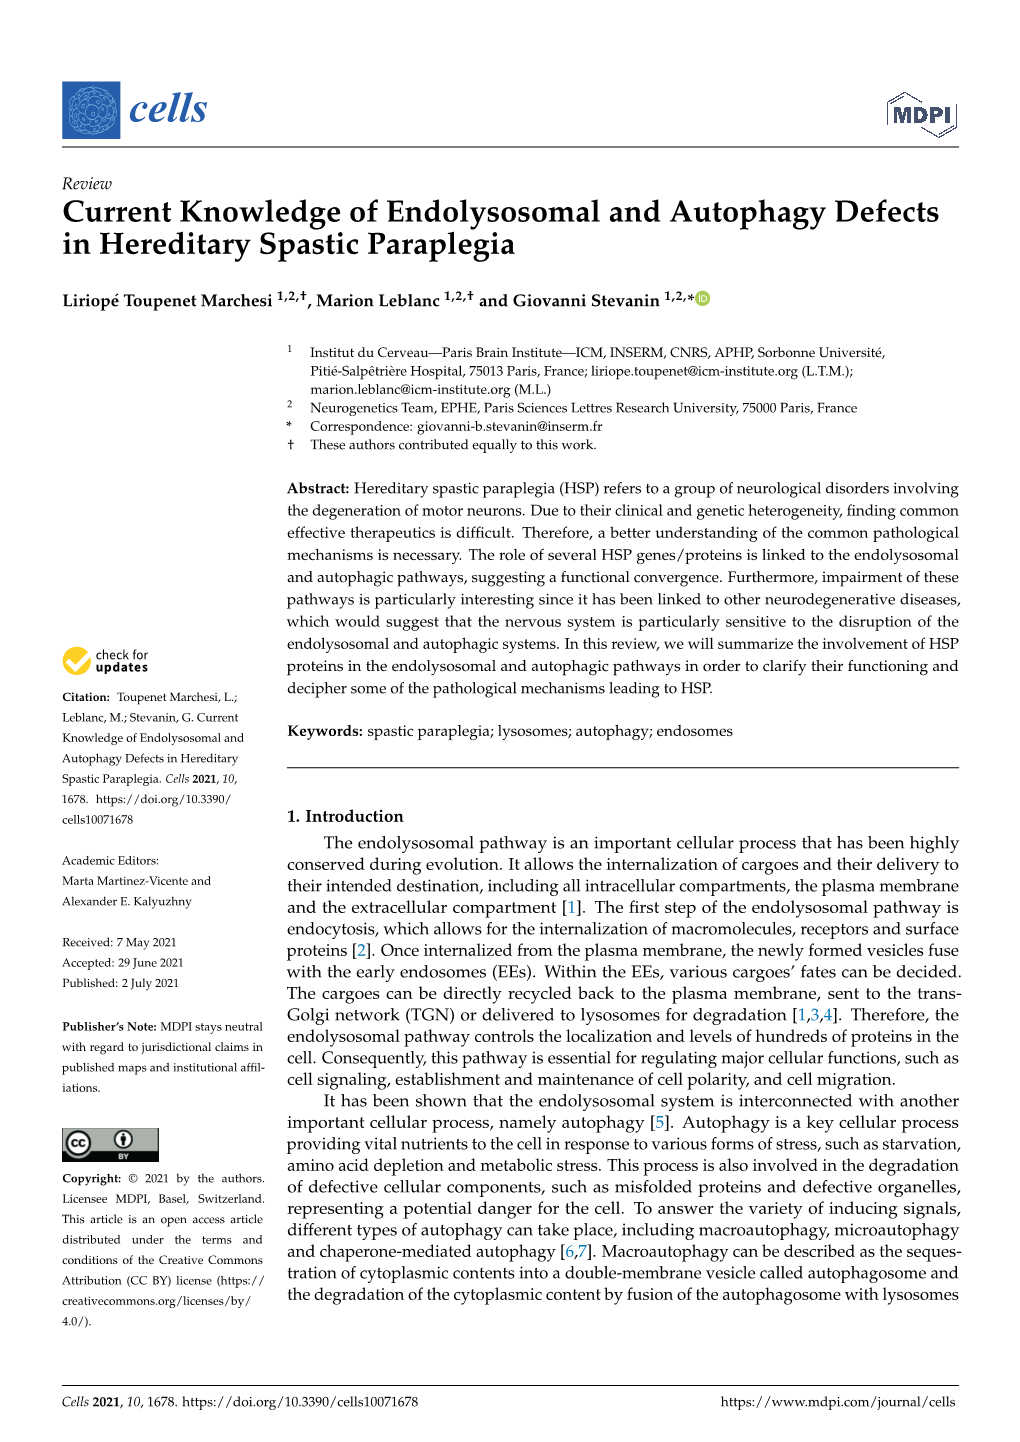 Current Knowledge of Endolysosomal and Autophagy Defects in Hereditary Spastic Paraplegia